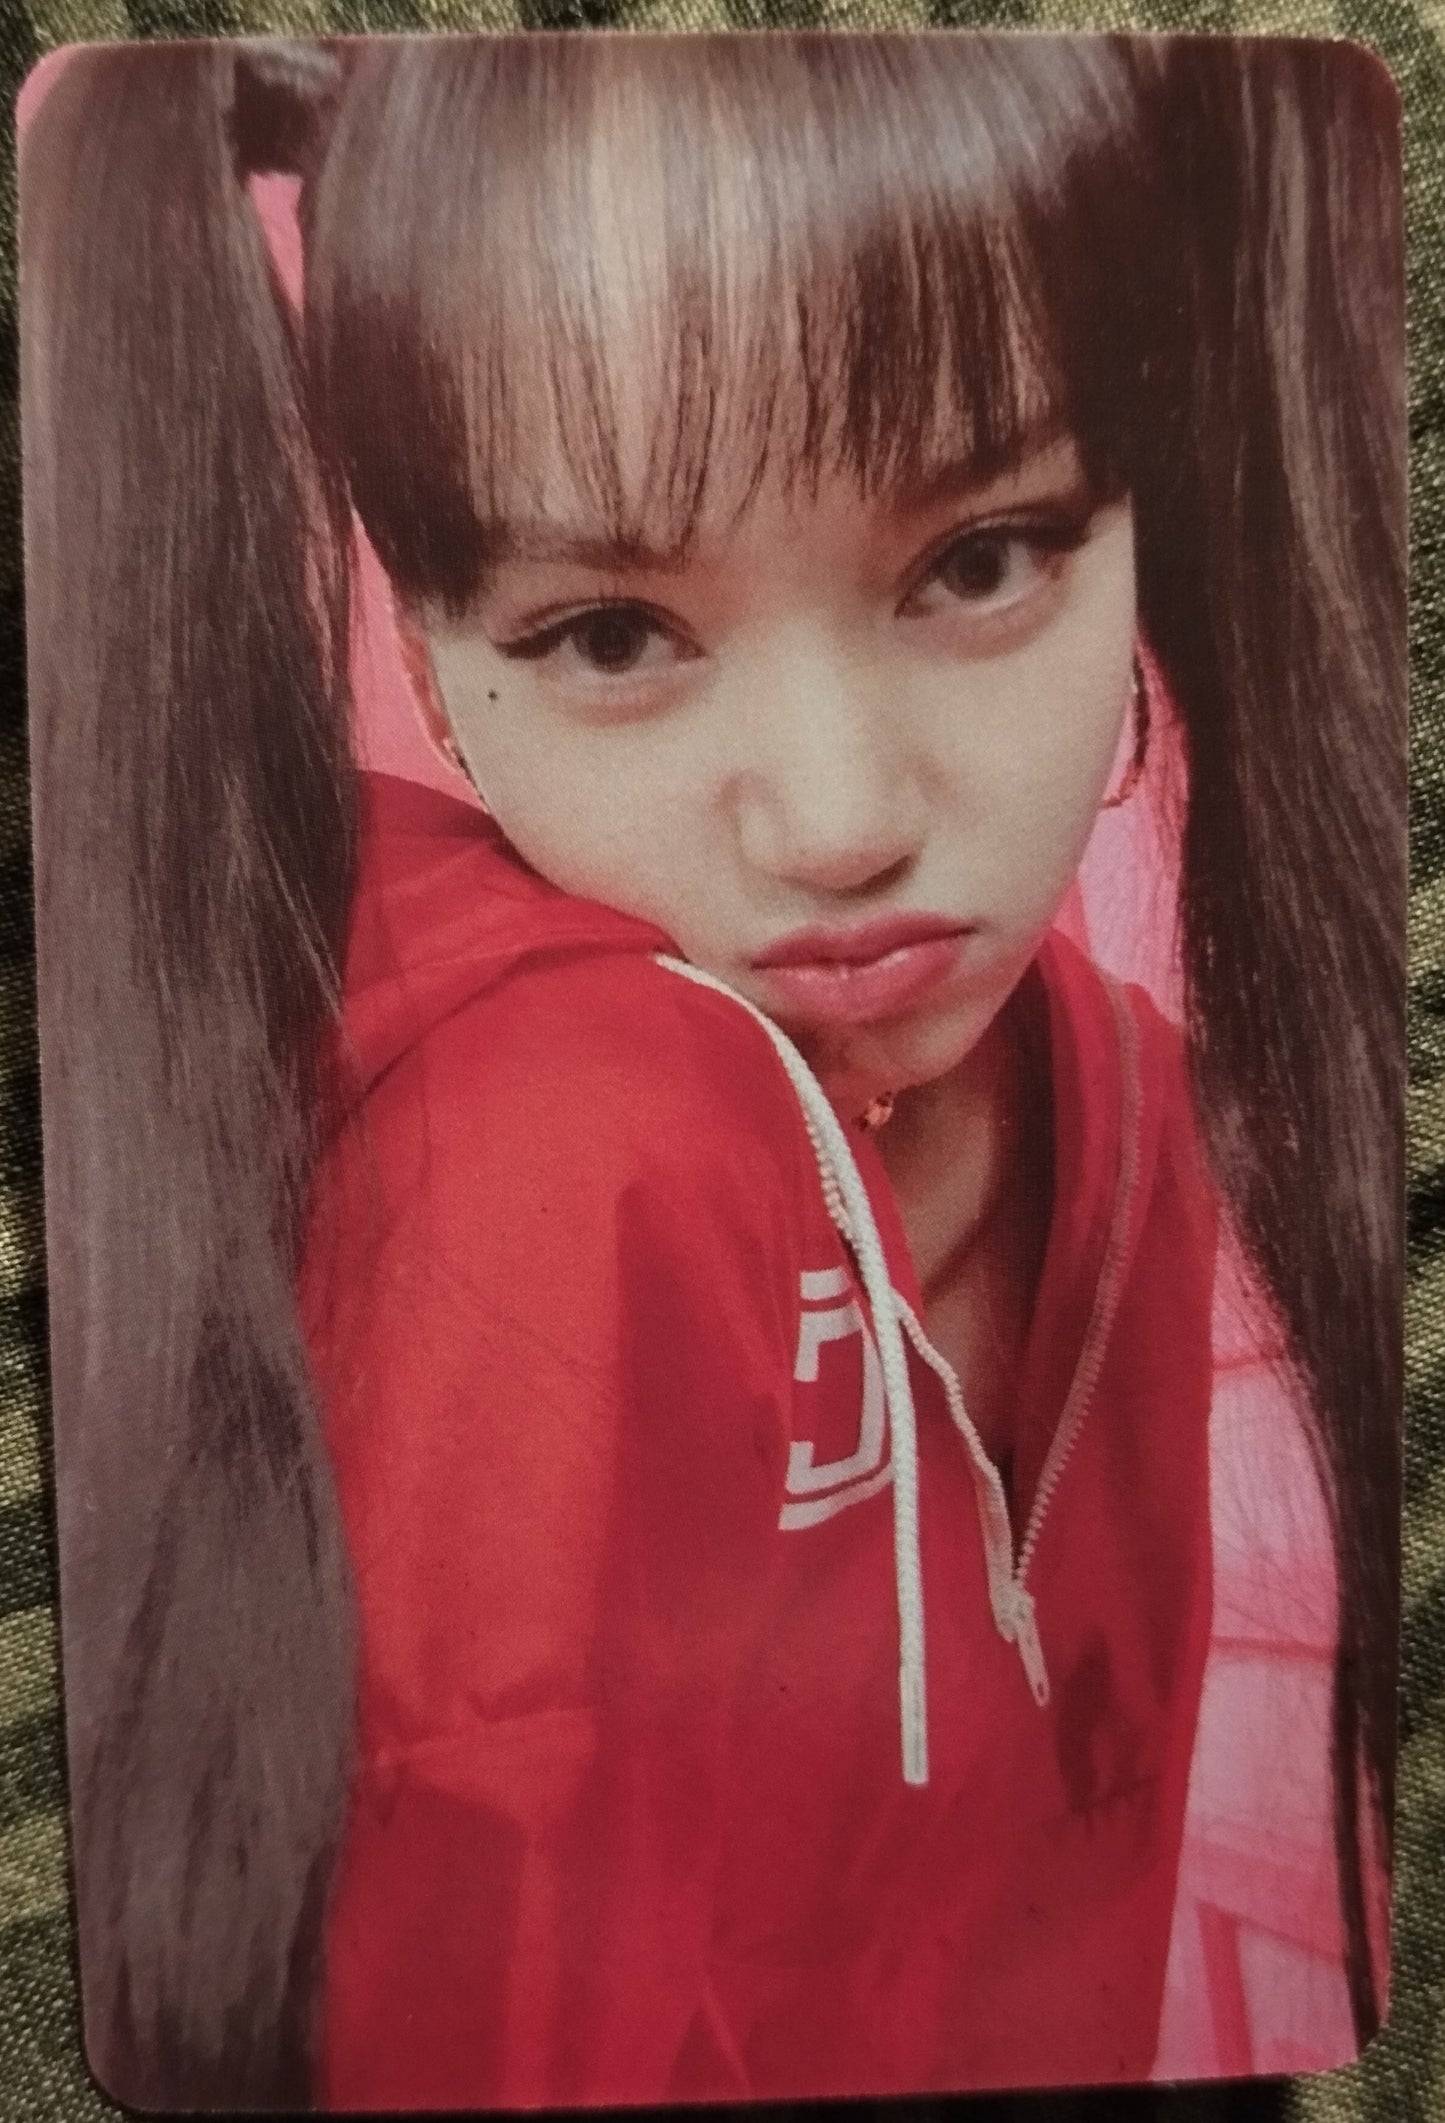 Photocard  BLACKPINK  Lisa  Videocall  D-Day solo